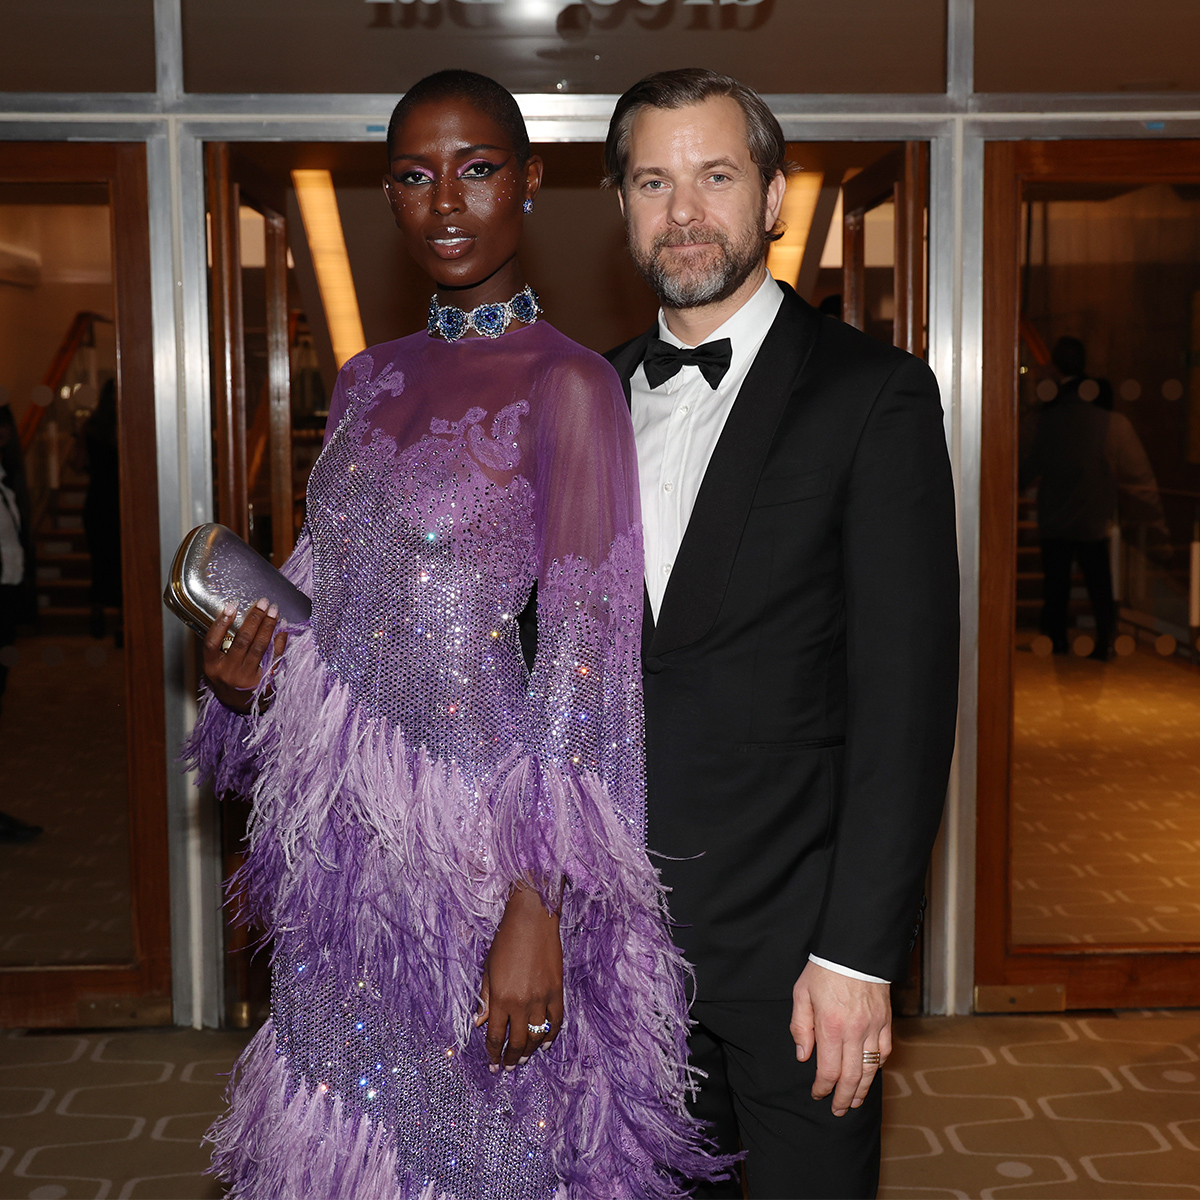 Revisit Jodie Turner-Smith and Joshua Jackson’s Private Marriage